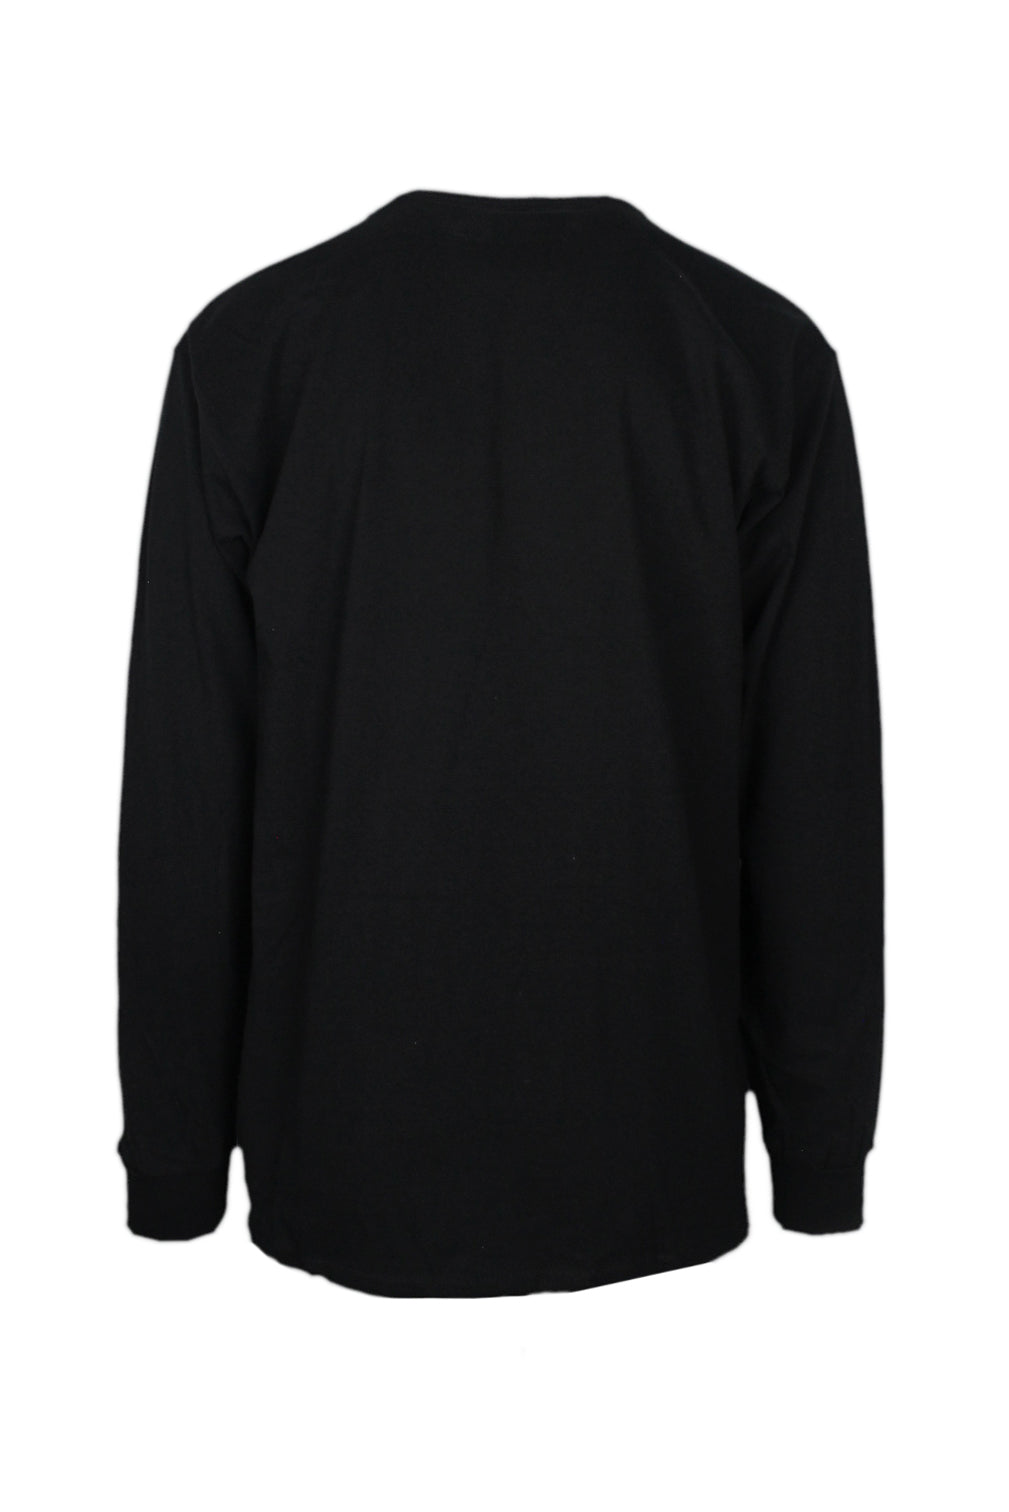 rear view with ribbed collar/cuffs of shirt.